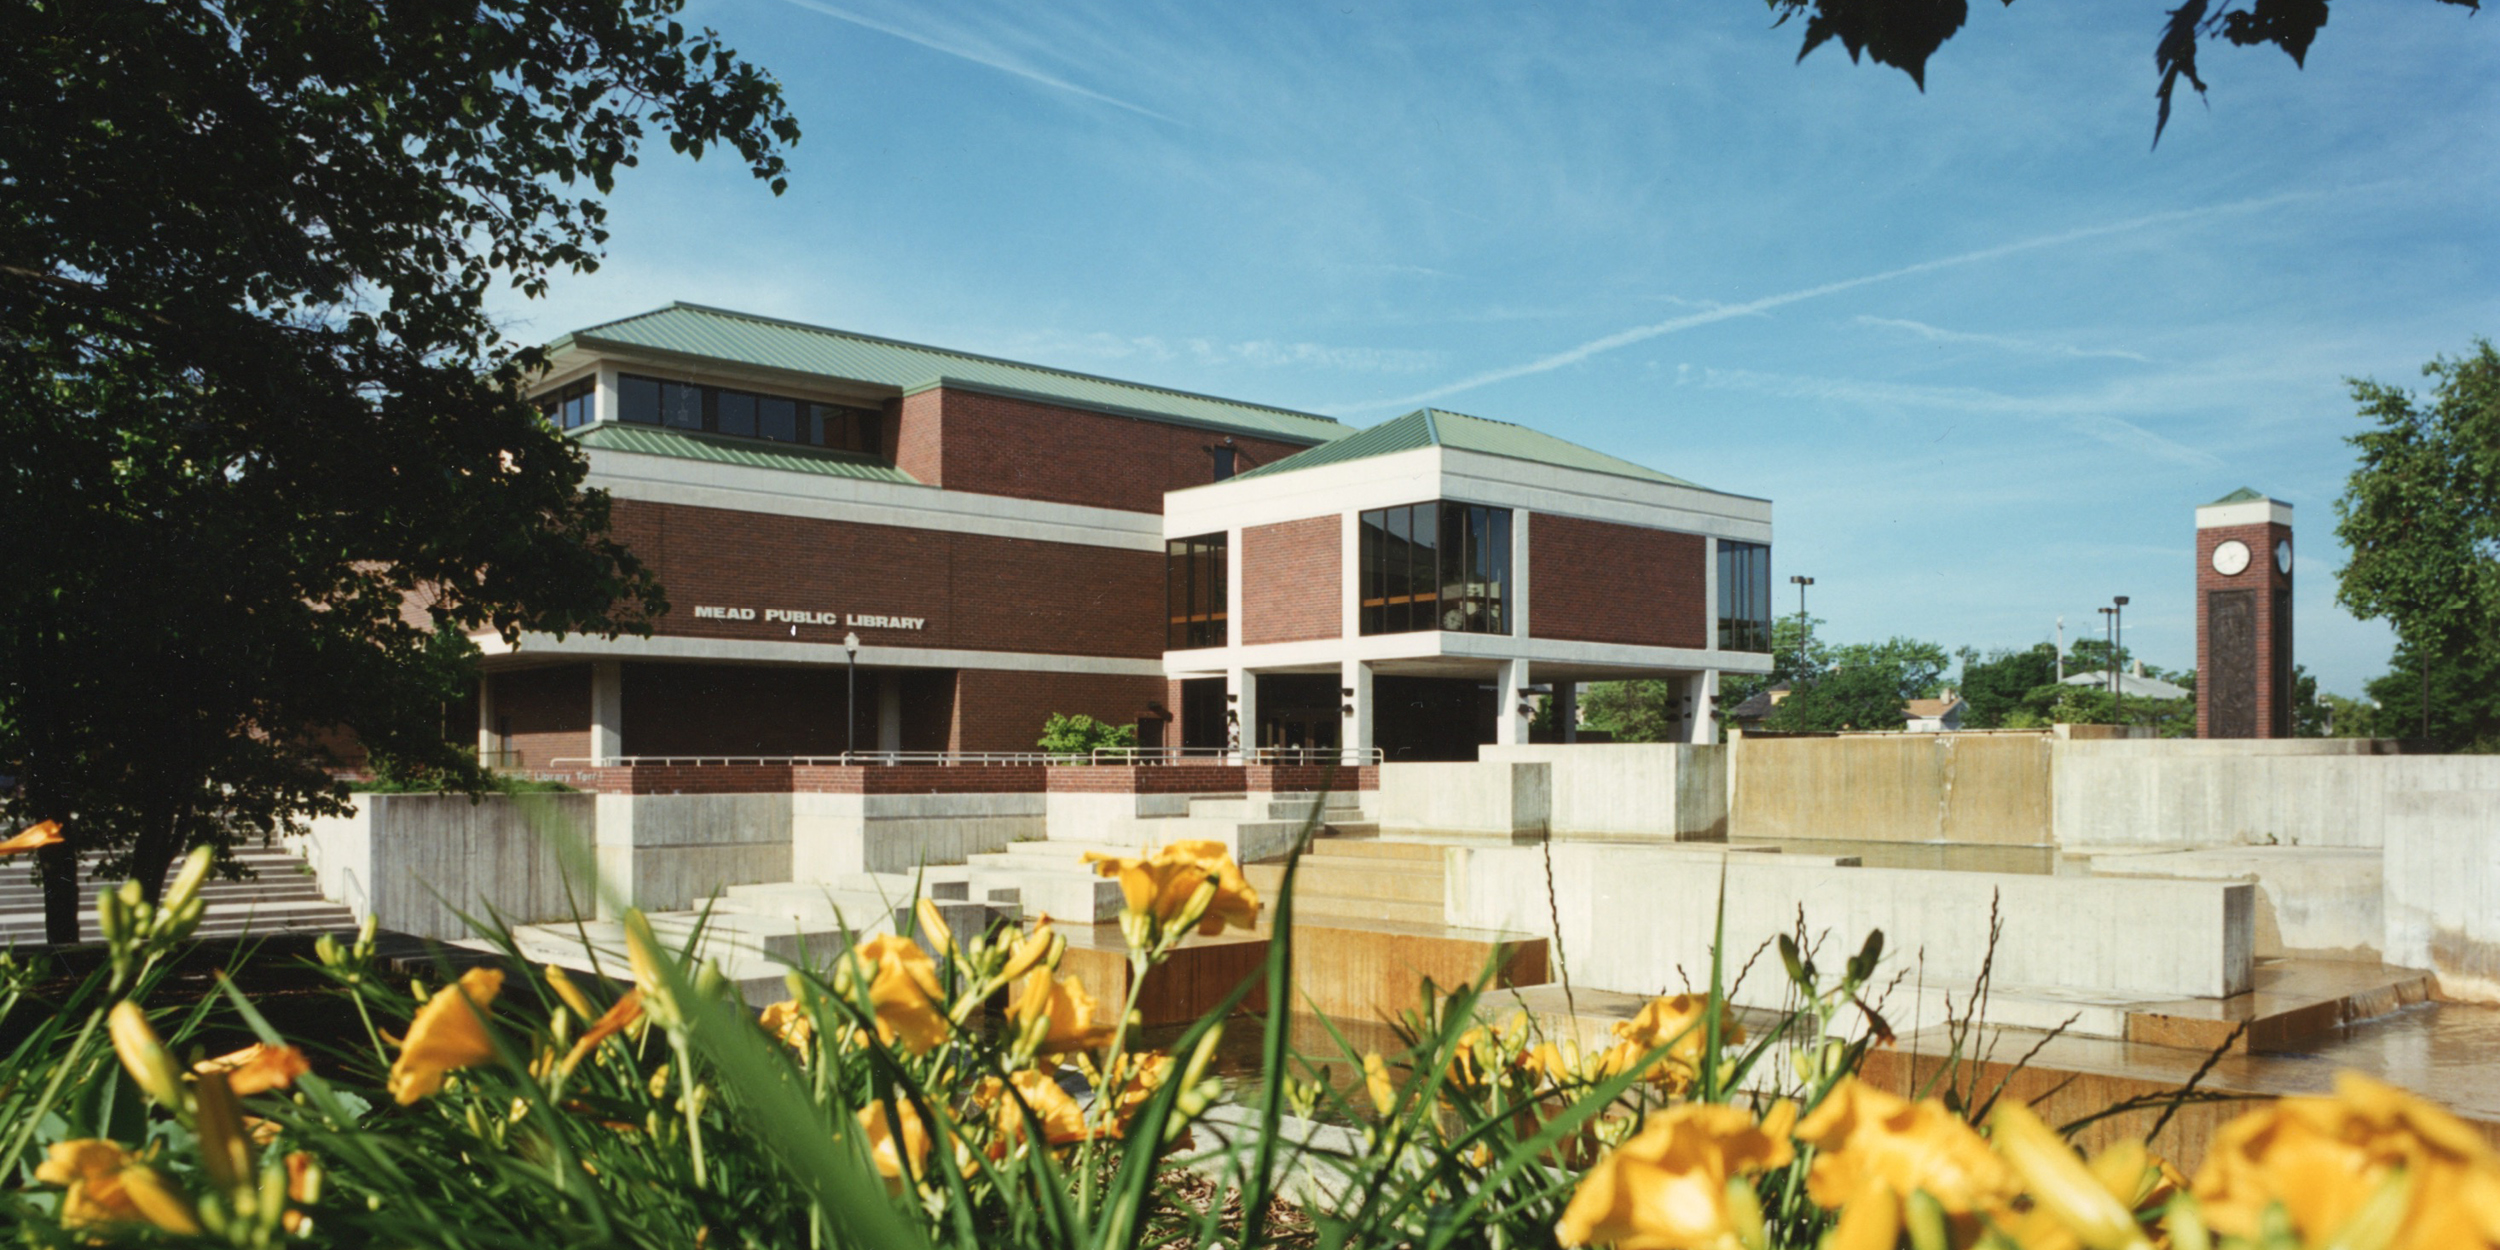 A photo of Mead Public Library in 1998.